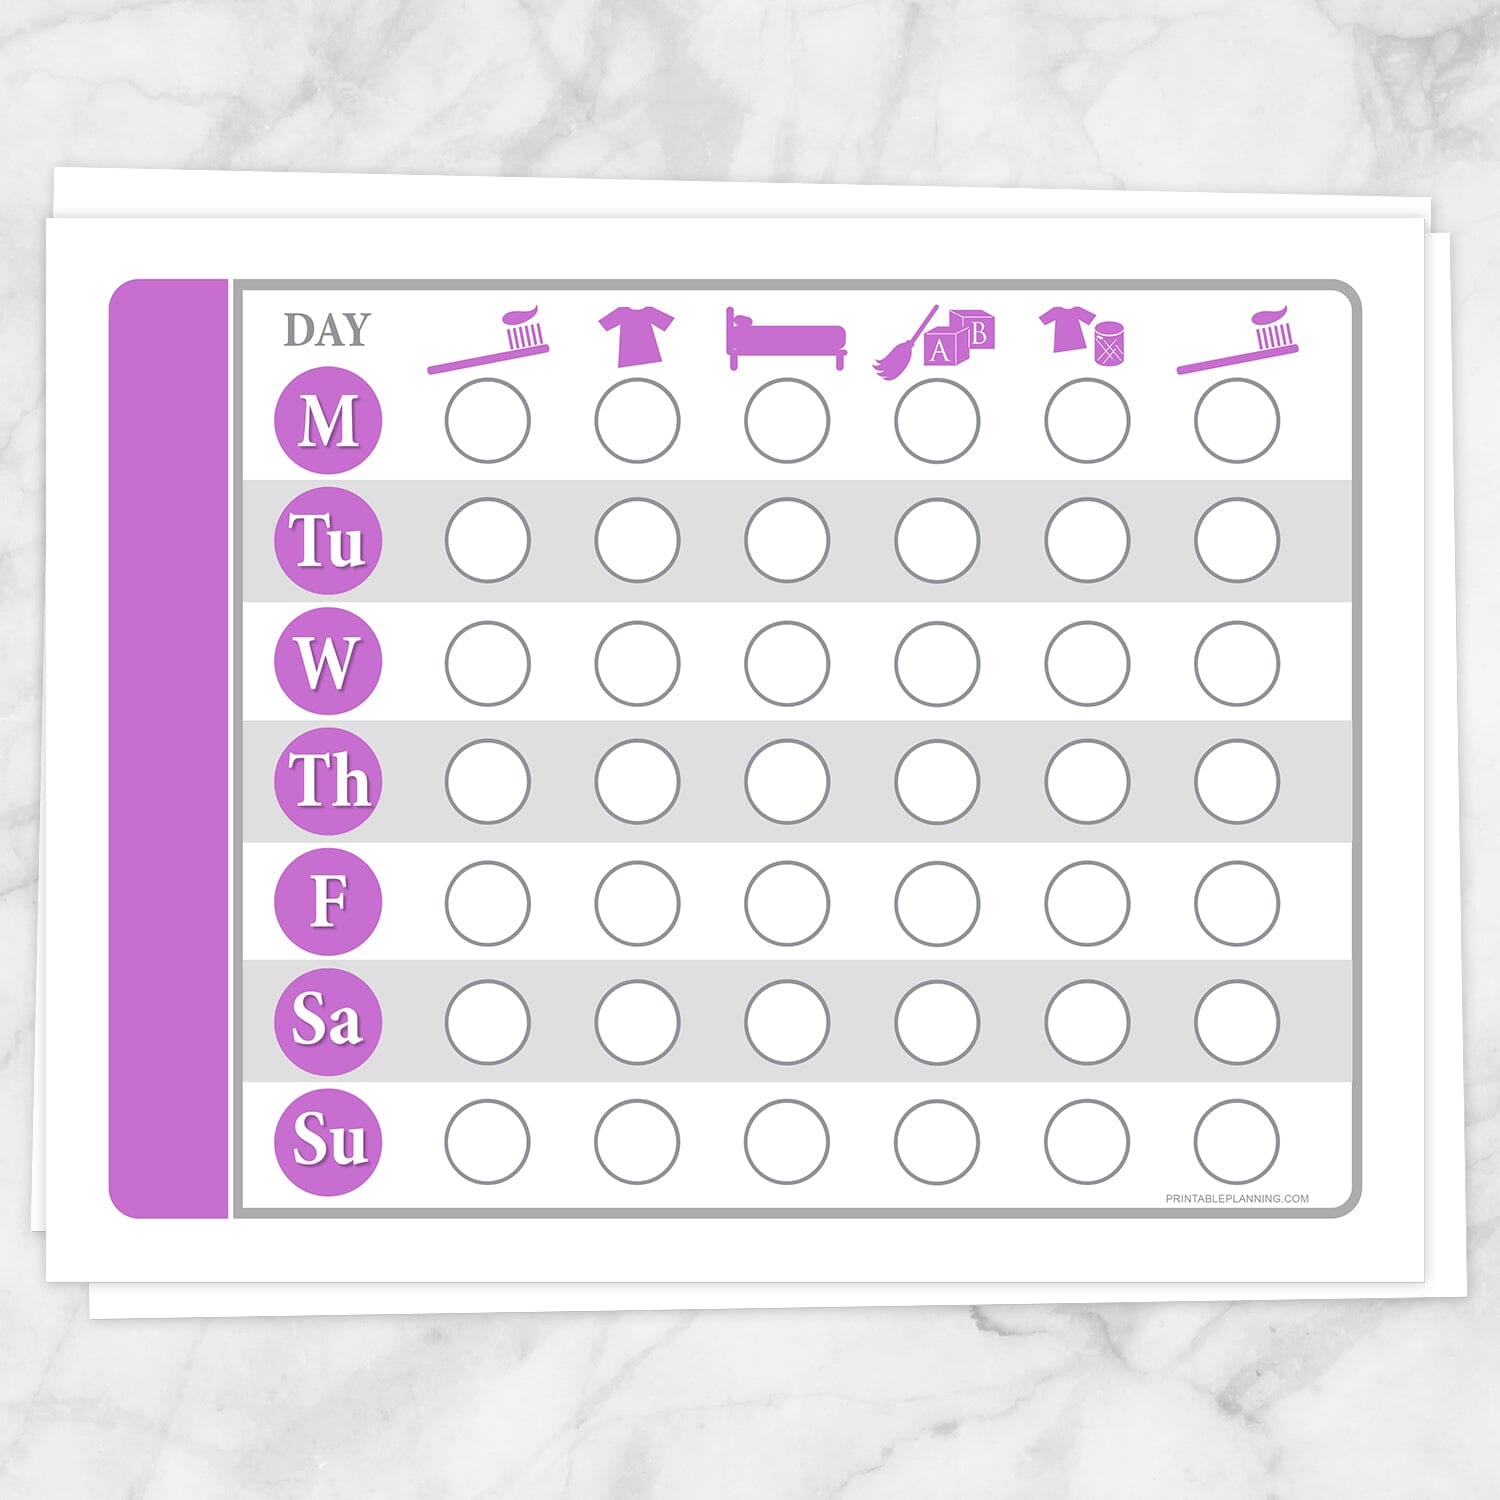 Printable Toddler Chore Chart - Daily Routine Weekly Pages in purple at Printable Planning.